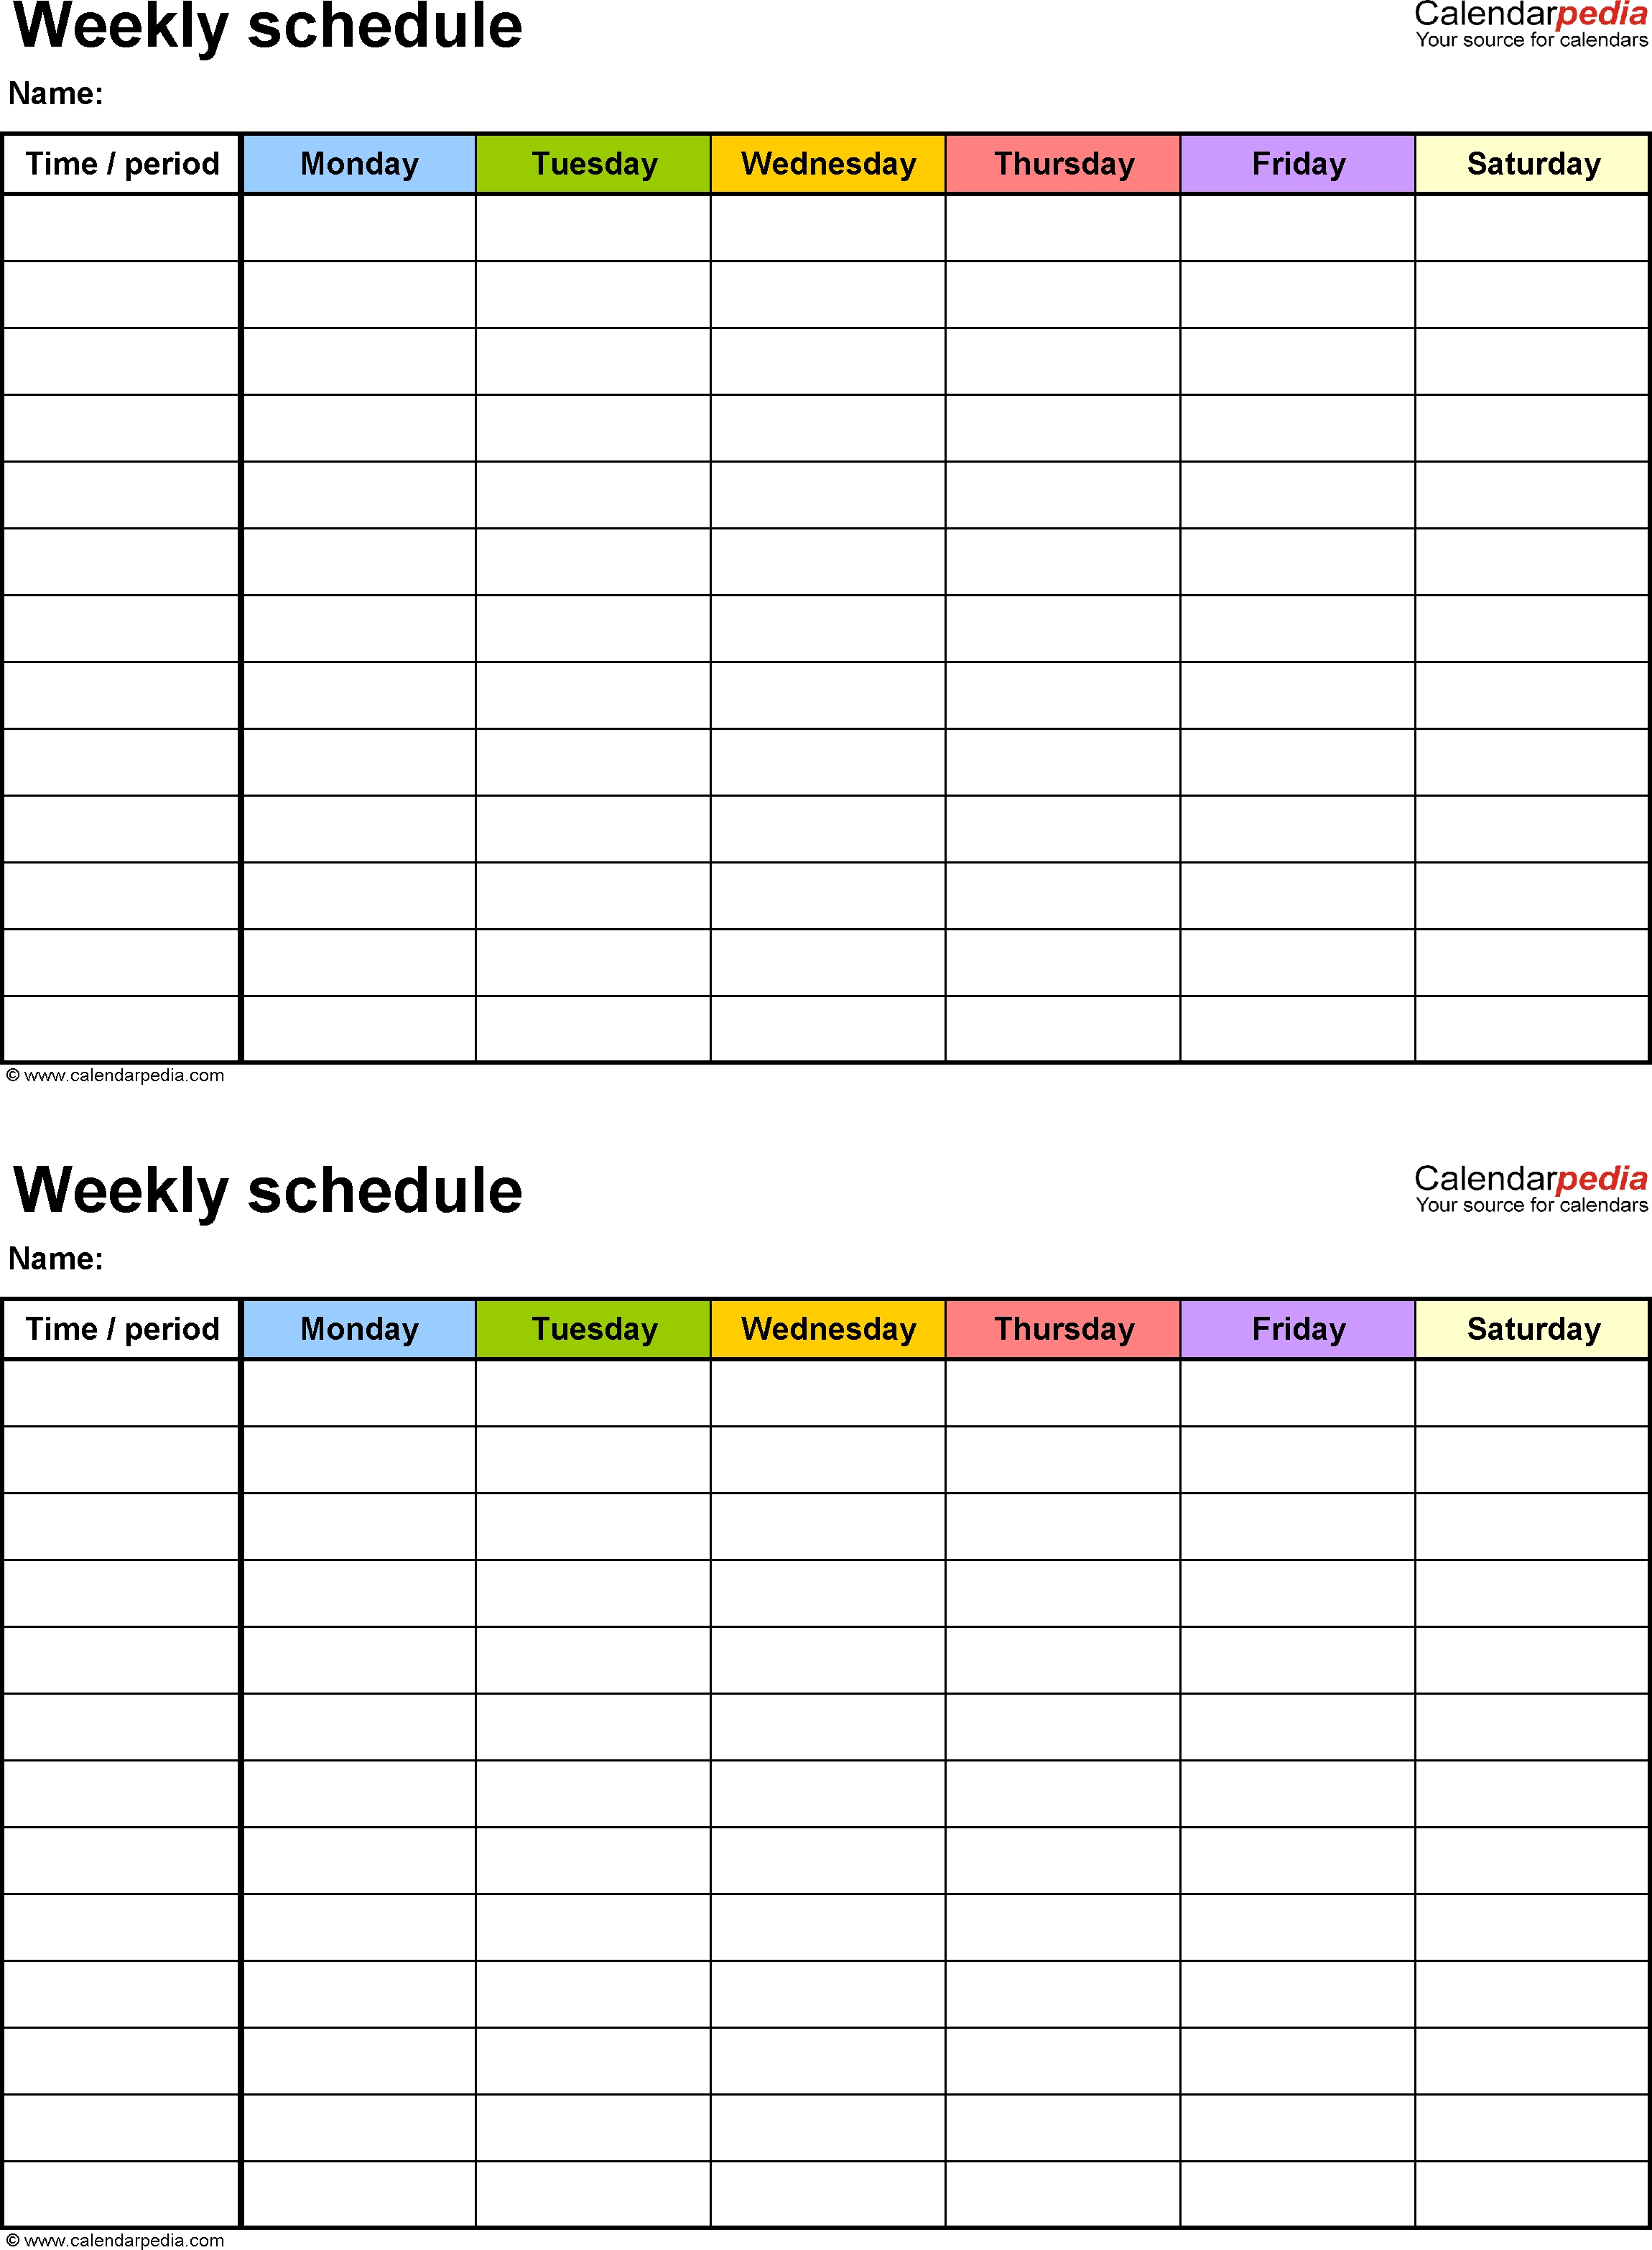 Free Weekly Schedule Templates For Word - 18 Templates intended for Blank Two Week Calendar Template